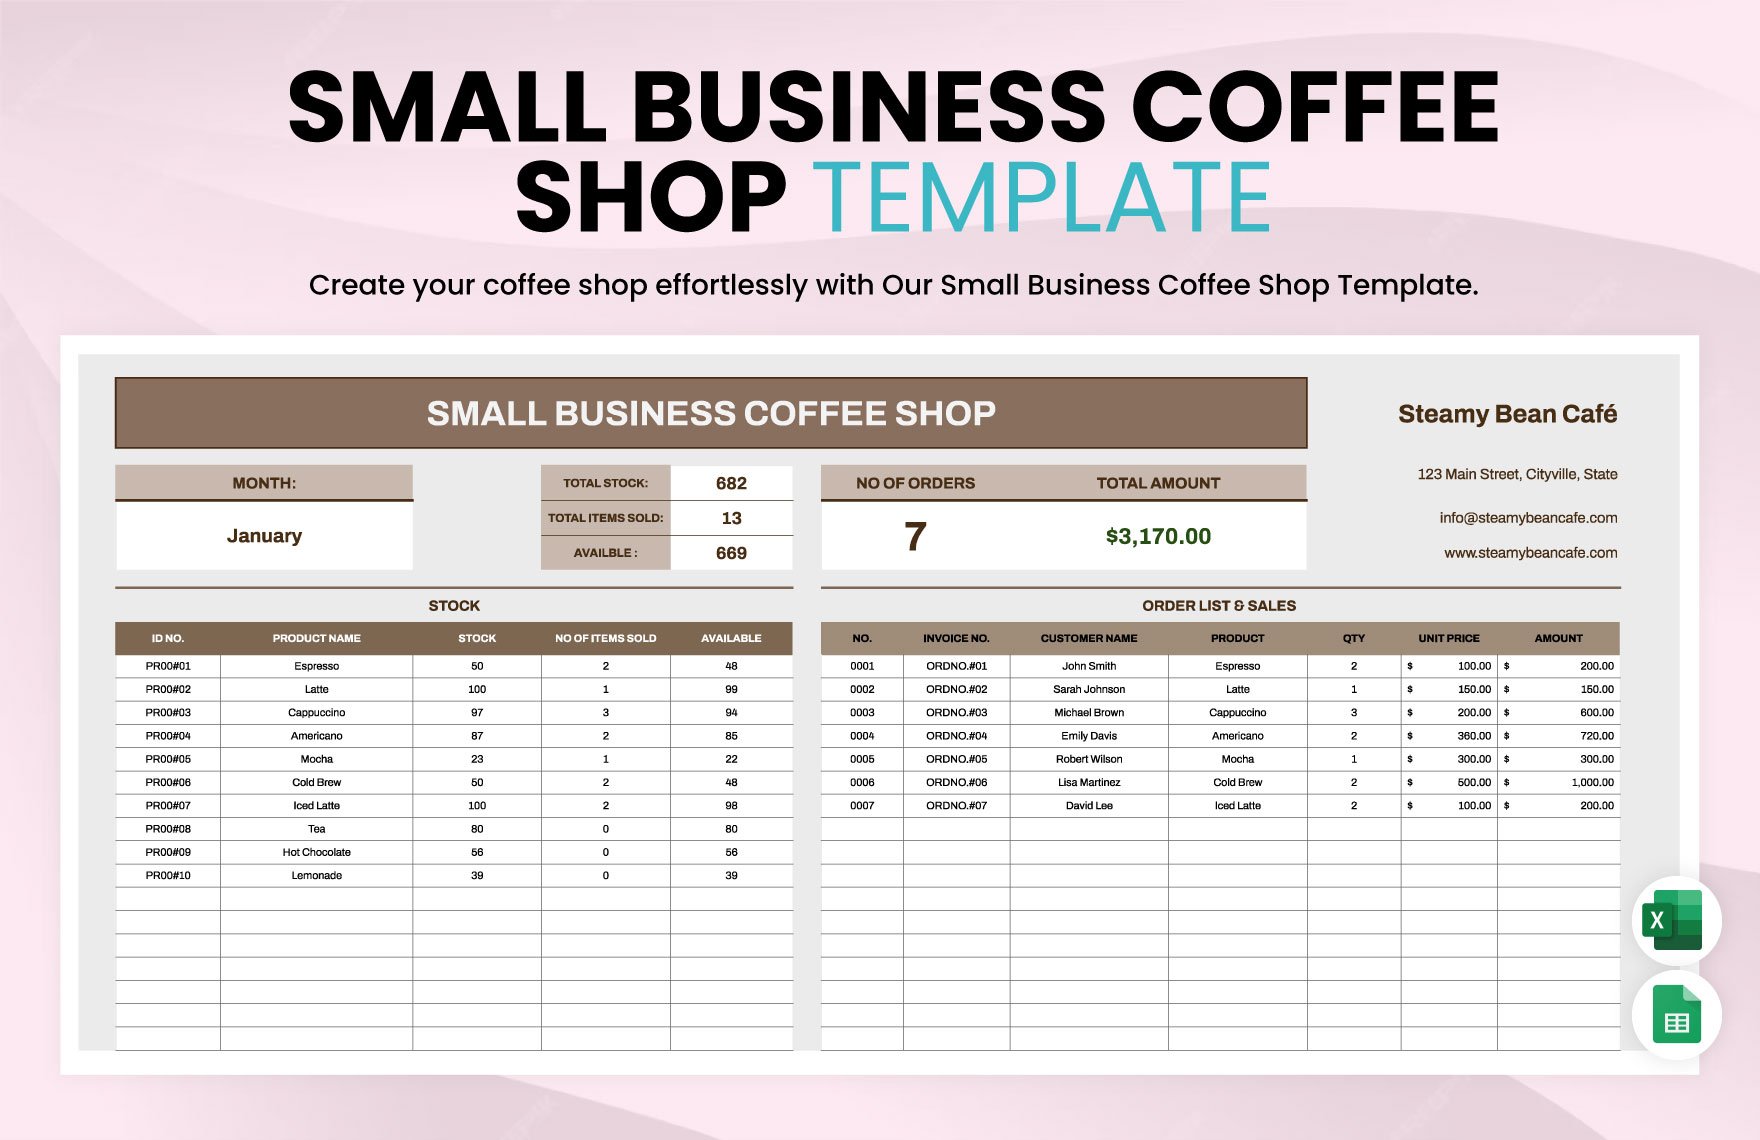 Small Business Coffee Shop Template in Excel, Google Sheets